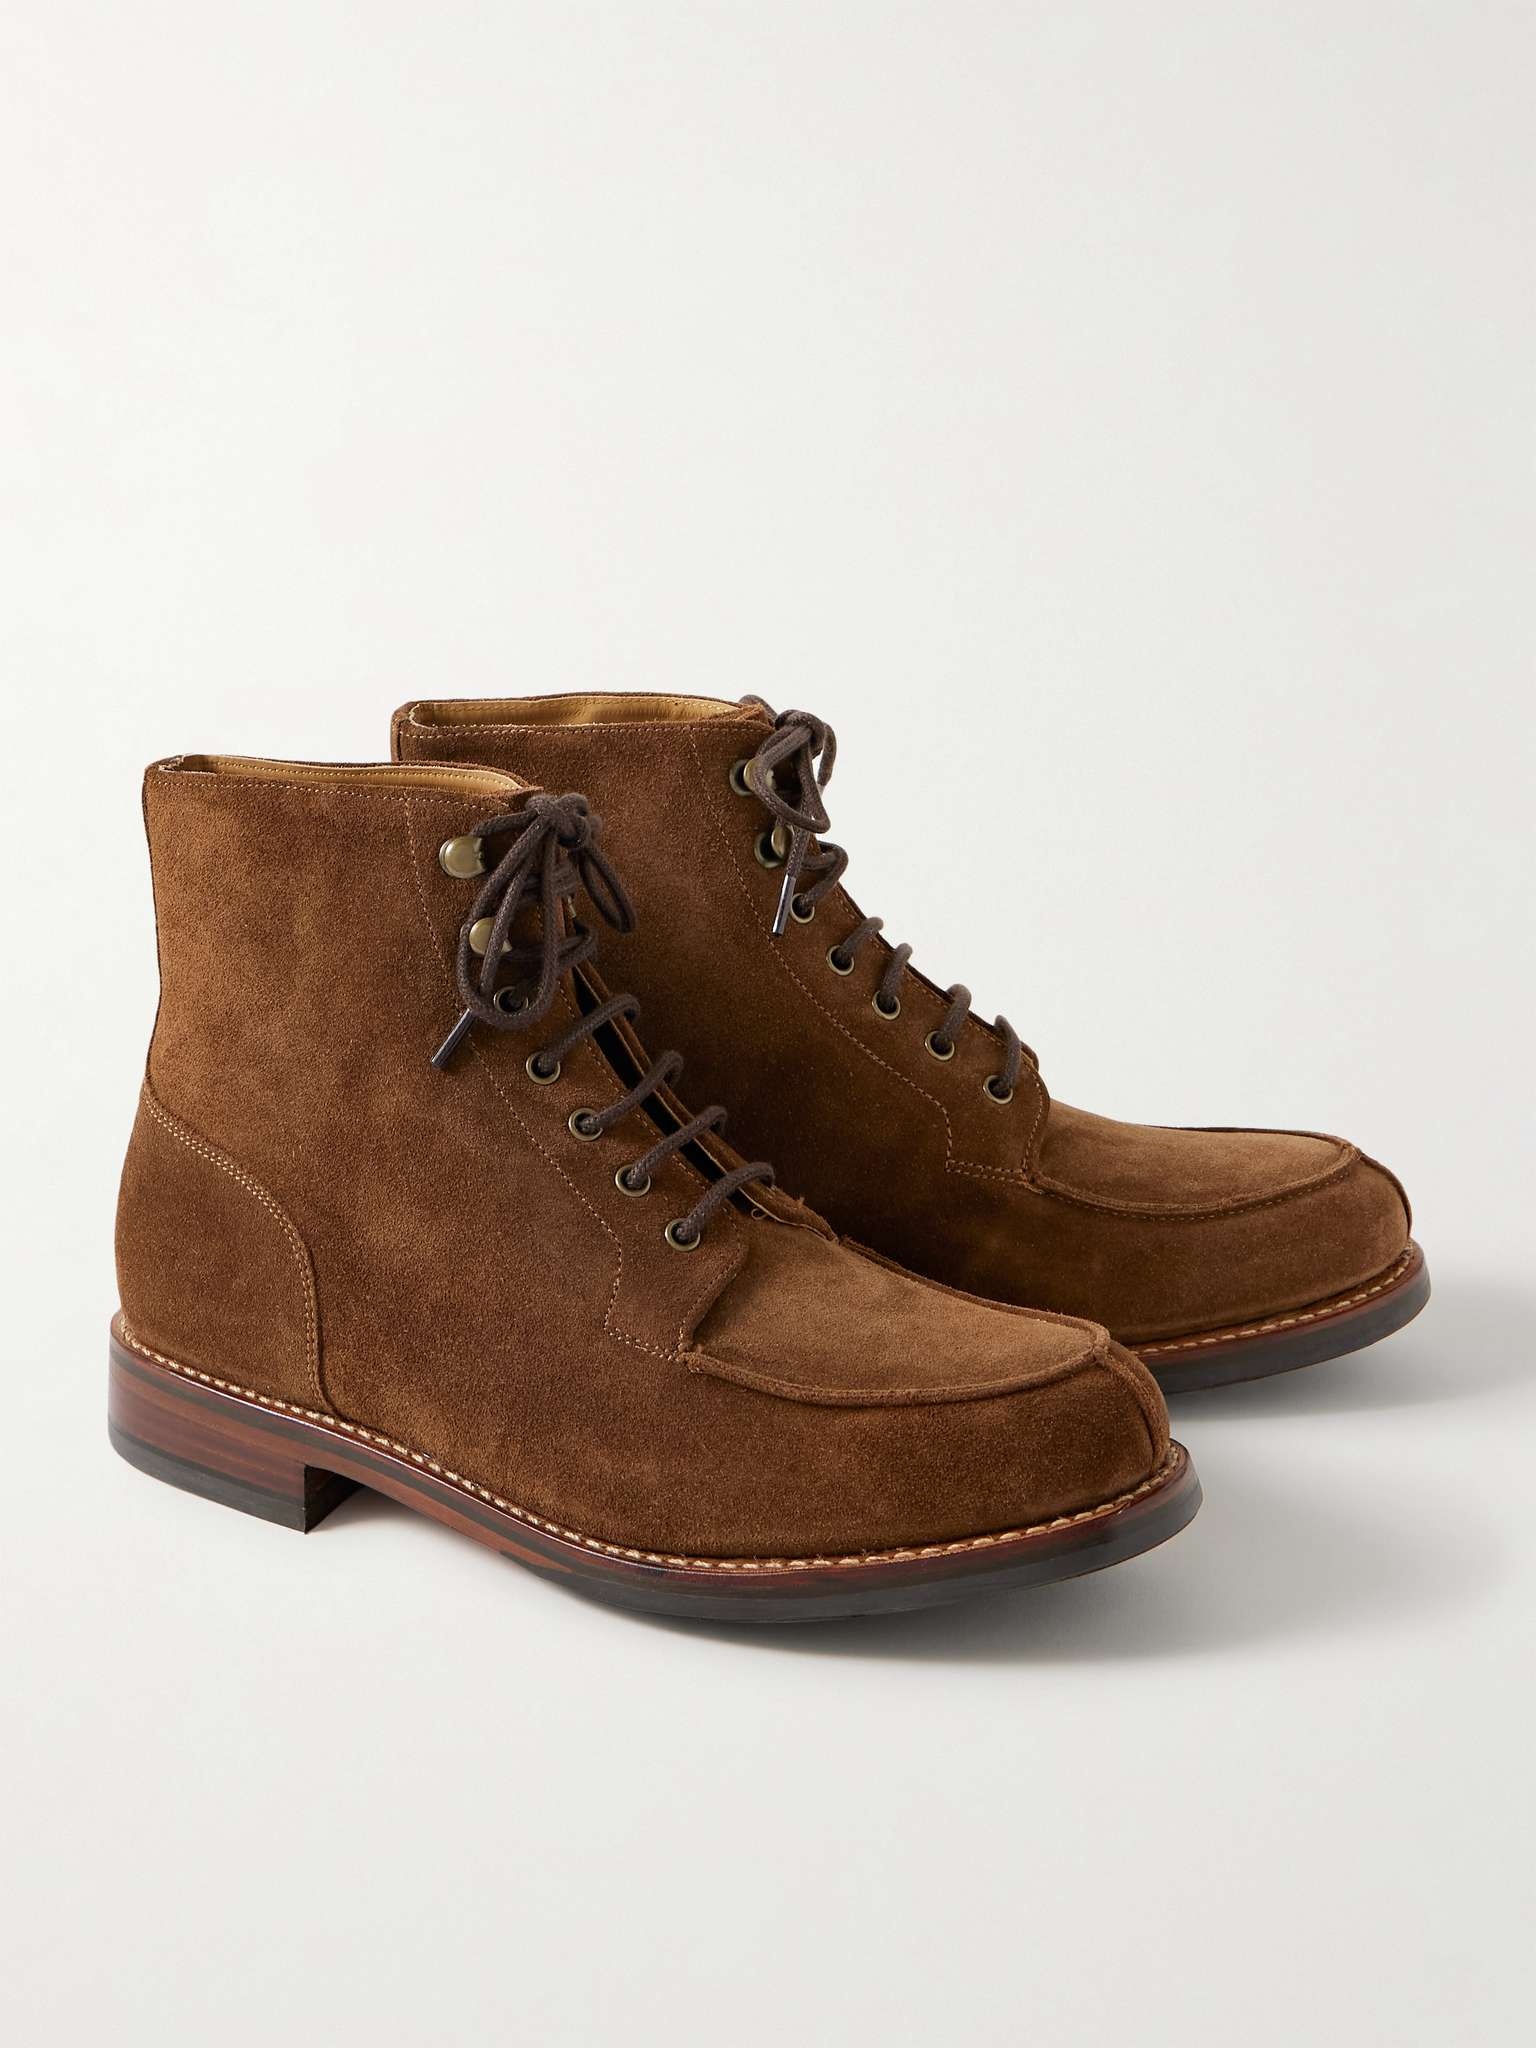 Donald Suede Boots - 4